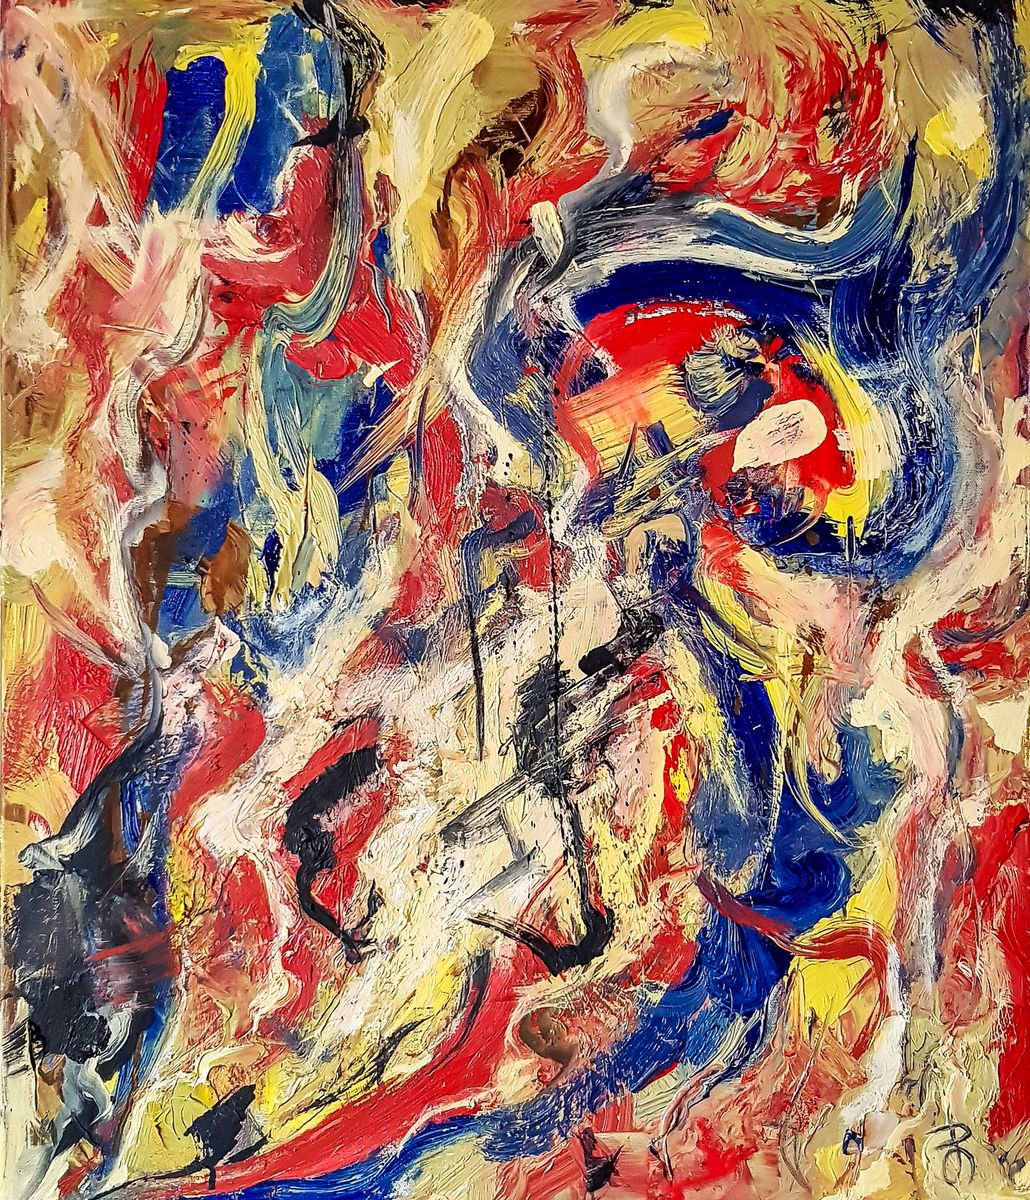 -Substitution- Action painting In the style of Willem de Kooning by Retne by Retne